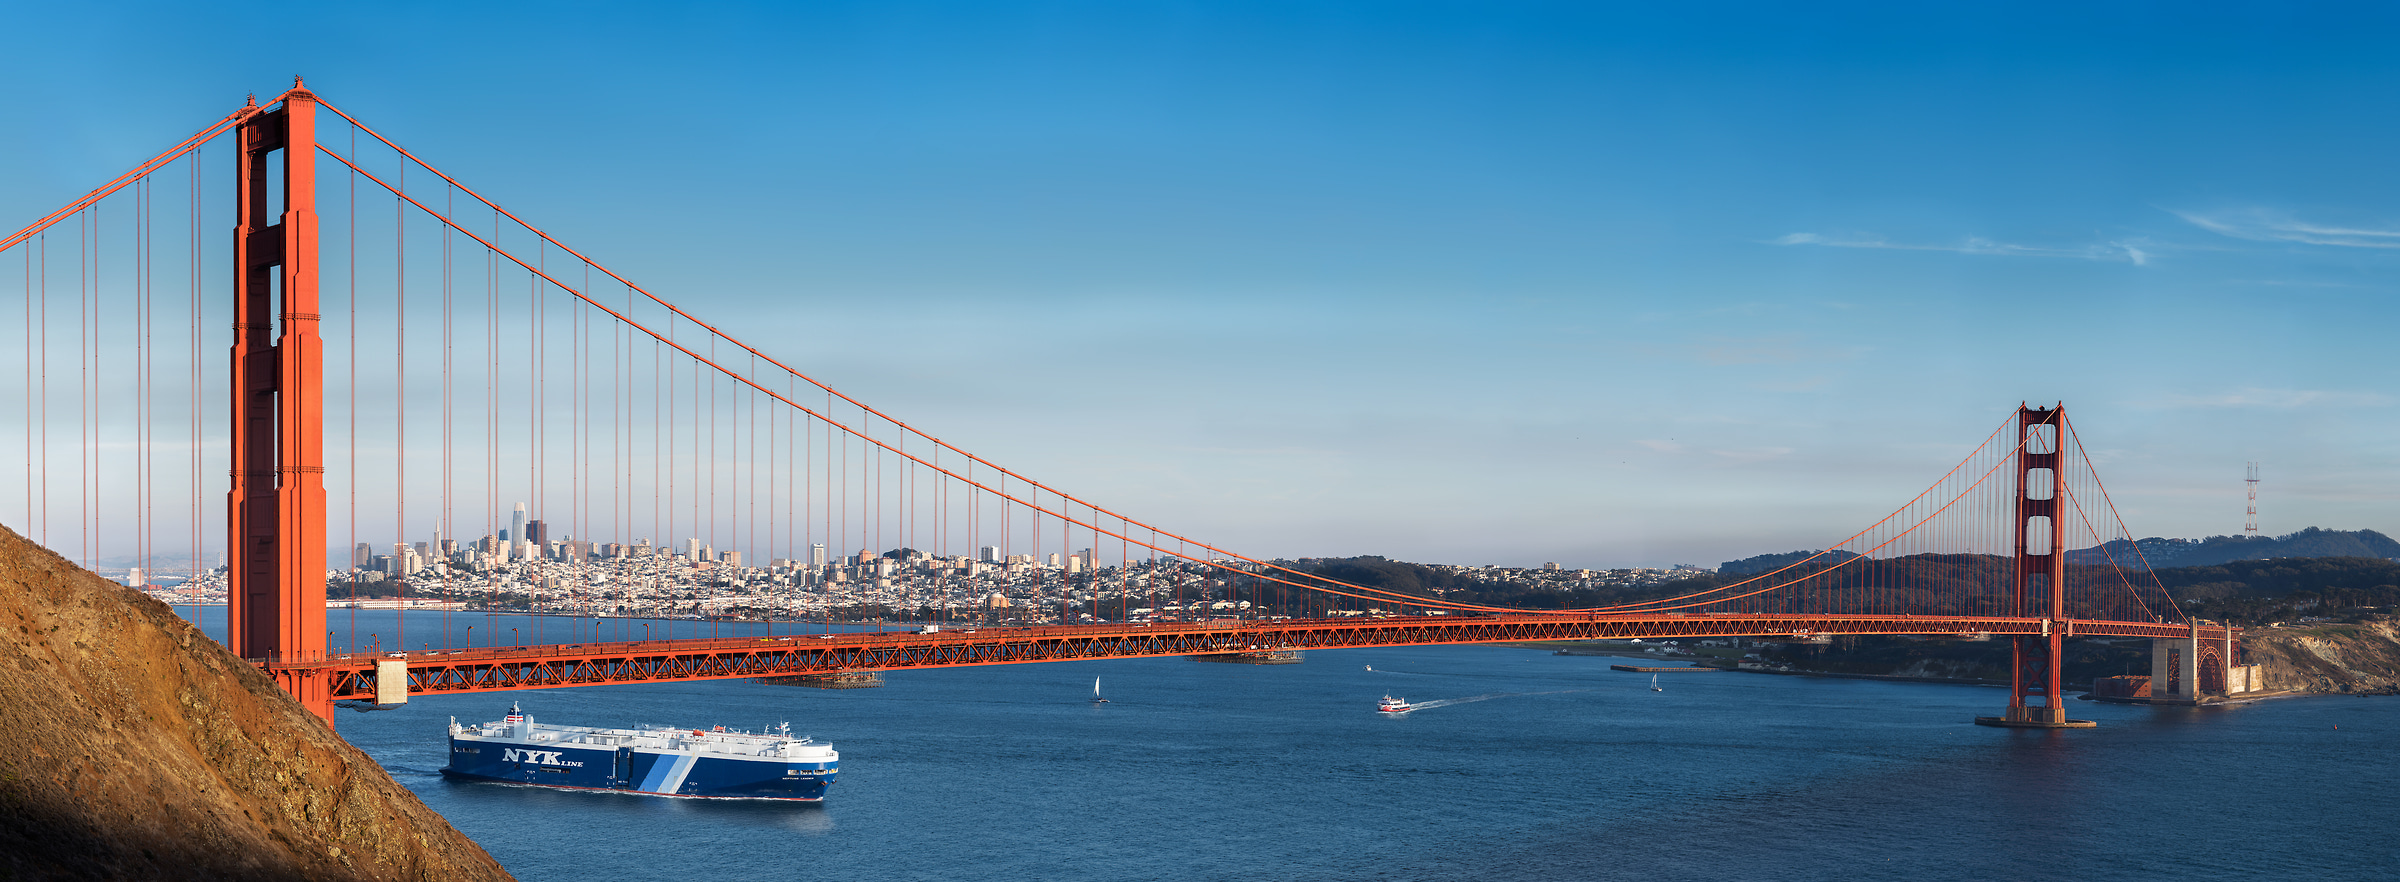 698 megapixels! A very high resolution, large-format VAST photo print of the Golden Gate Bridge in front of the San Francisco skyline on a blue sky day; photograph created by Jim Tarpo in Mill Valley, California.